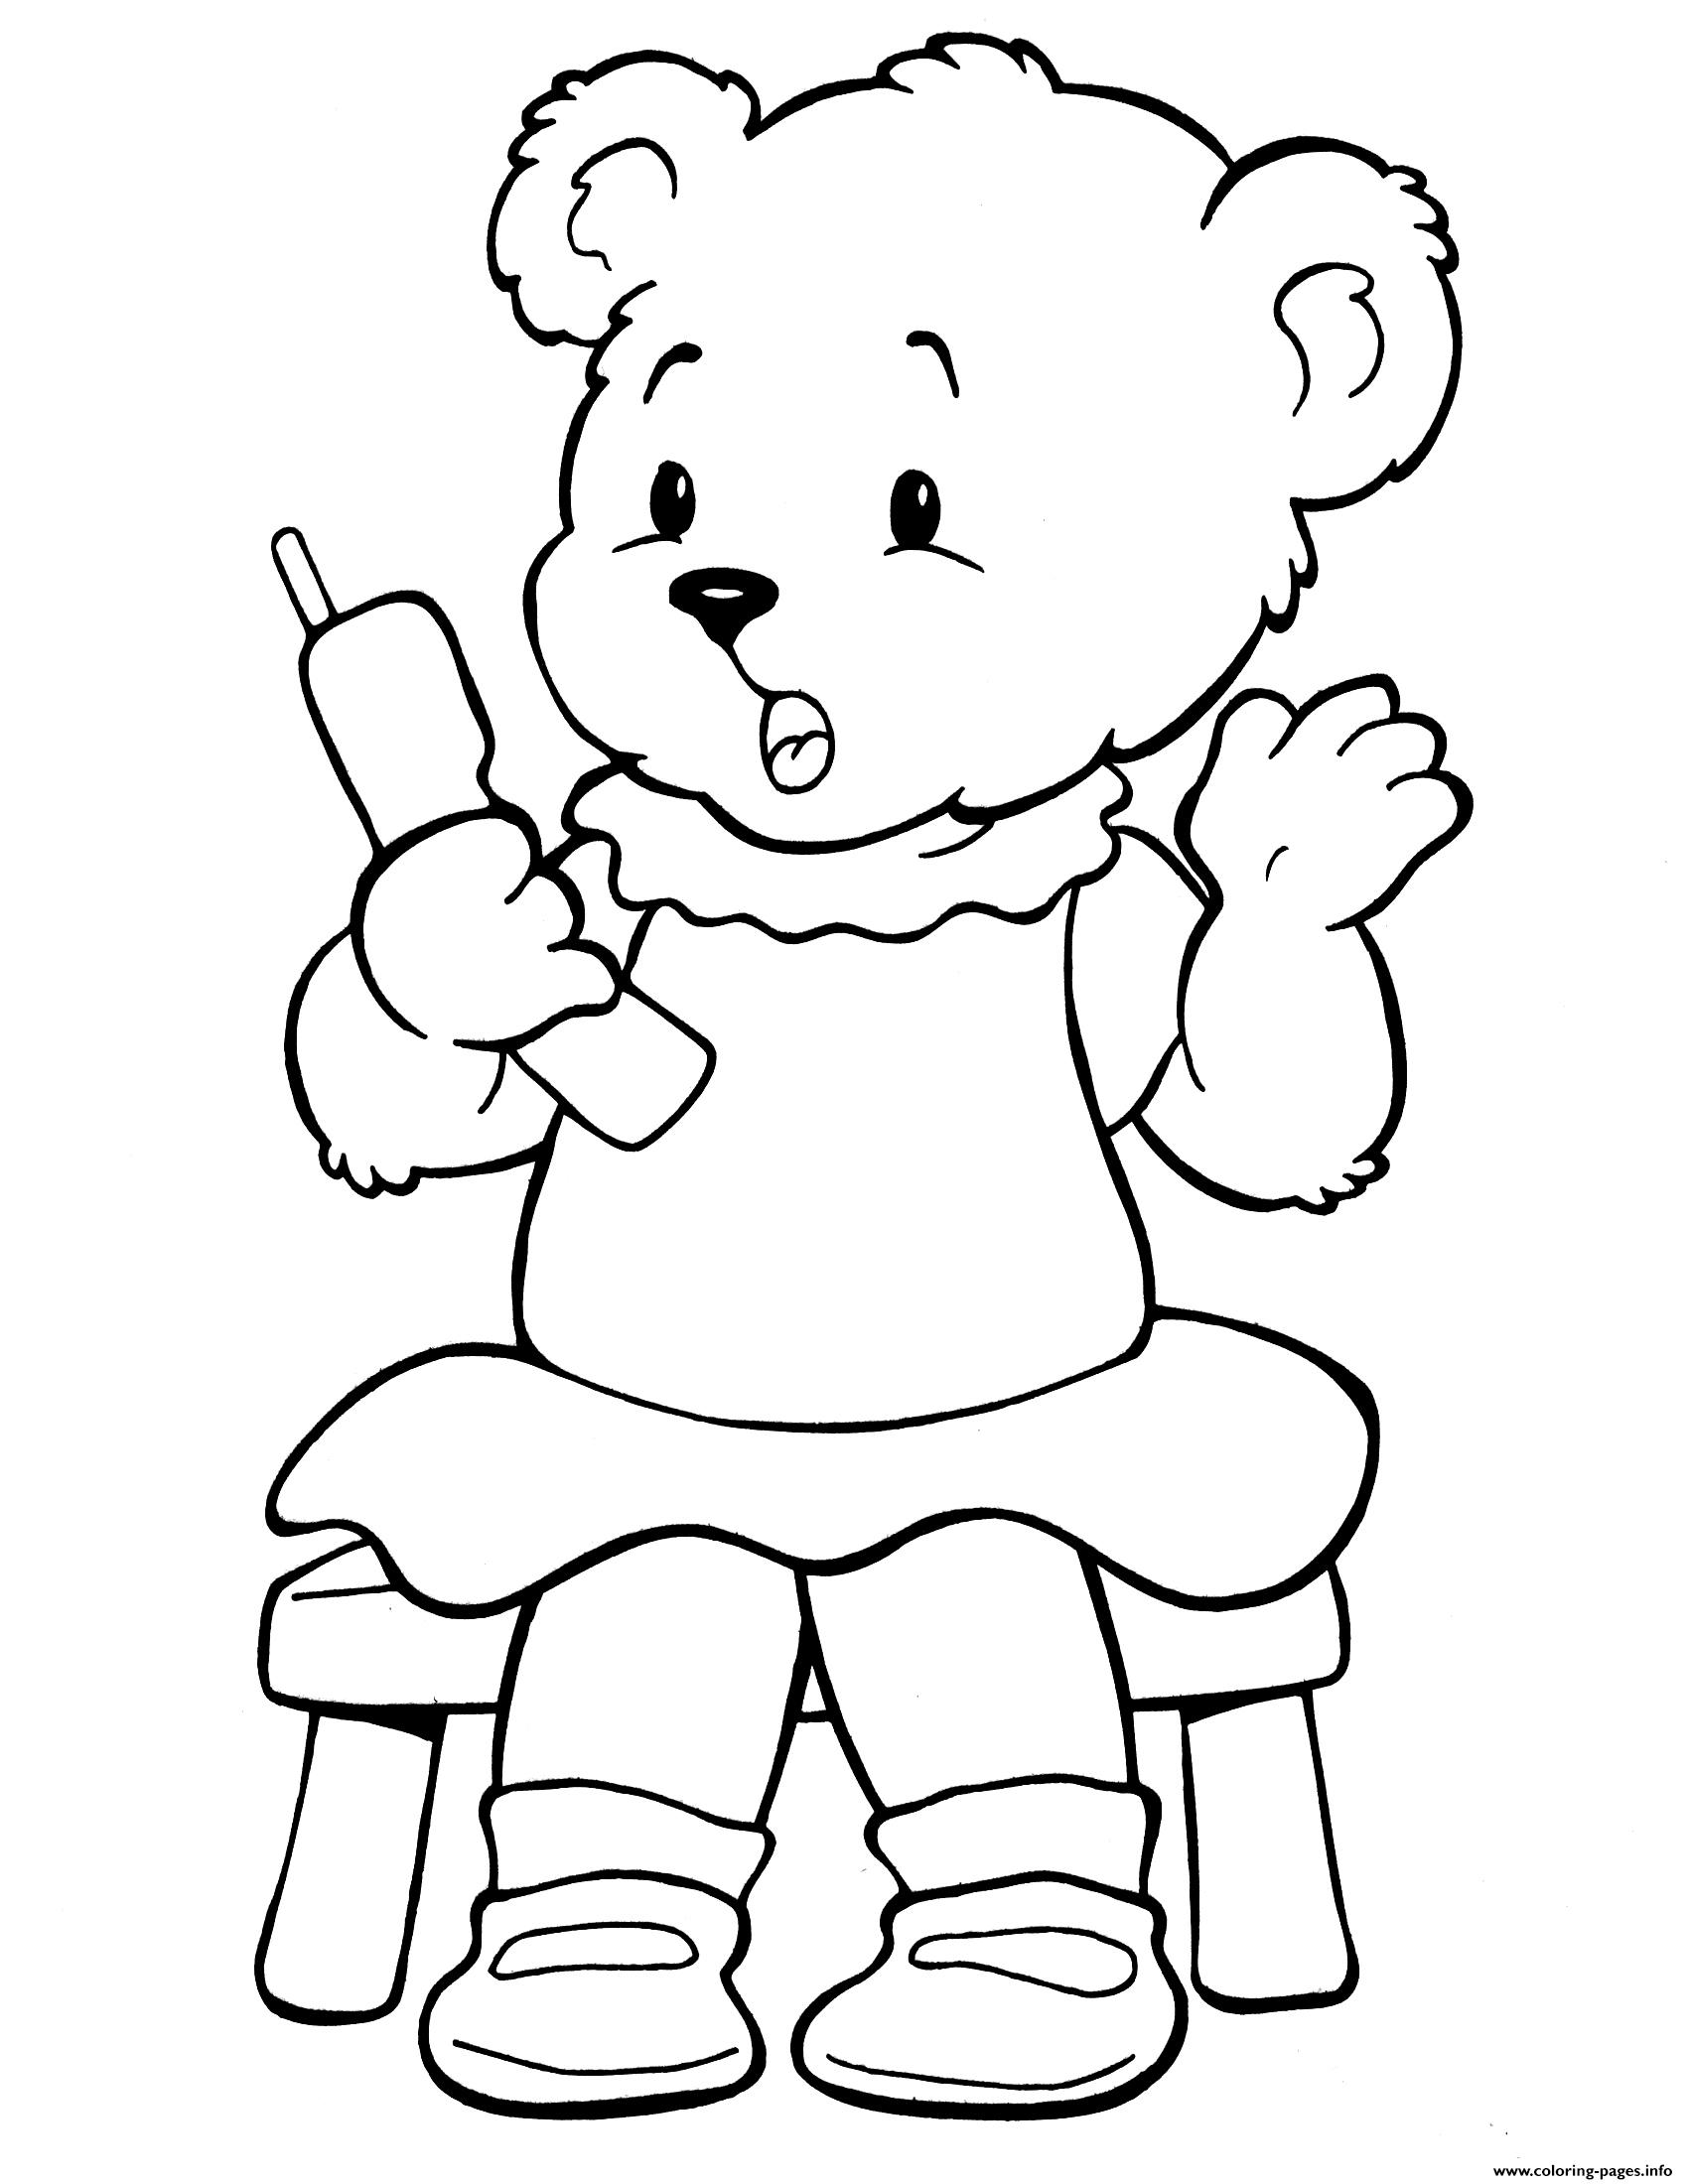 Teddy Bear On The Phone coloring